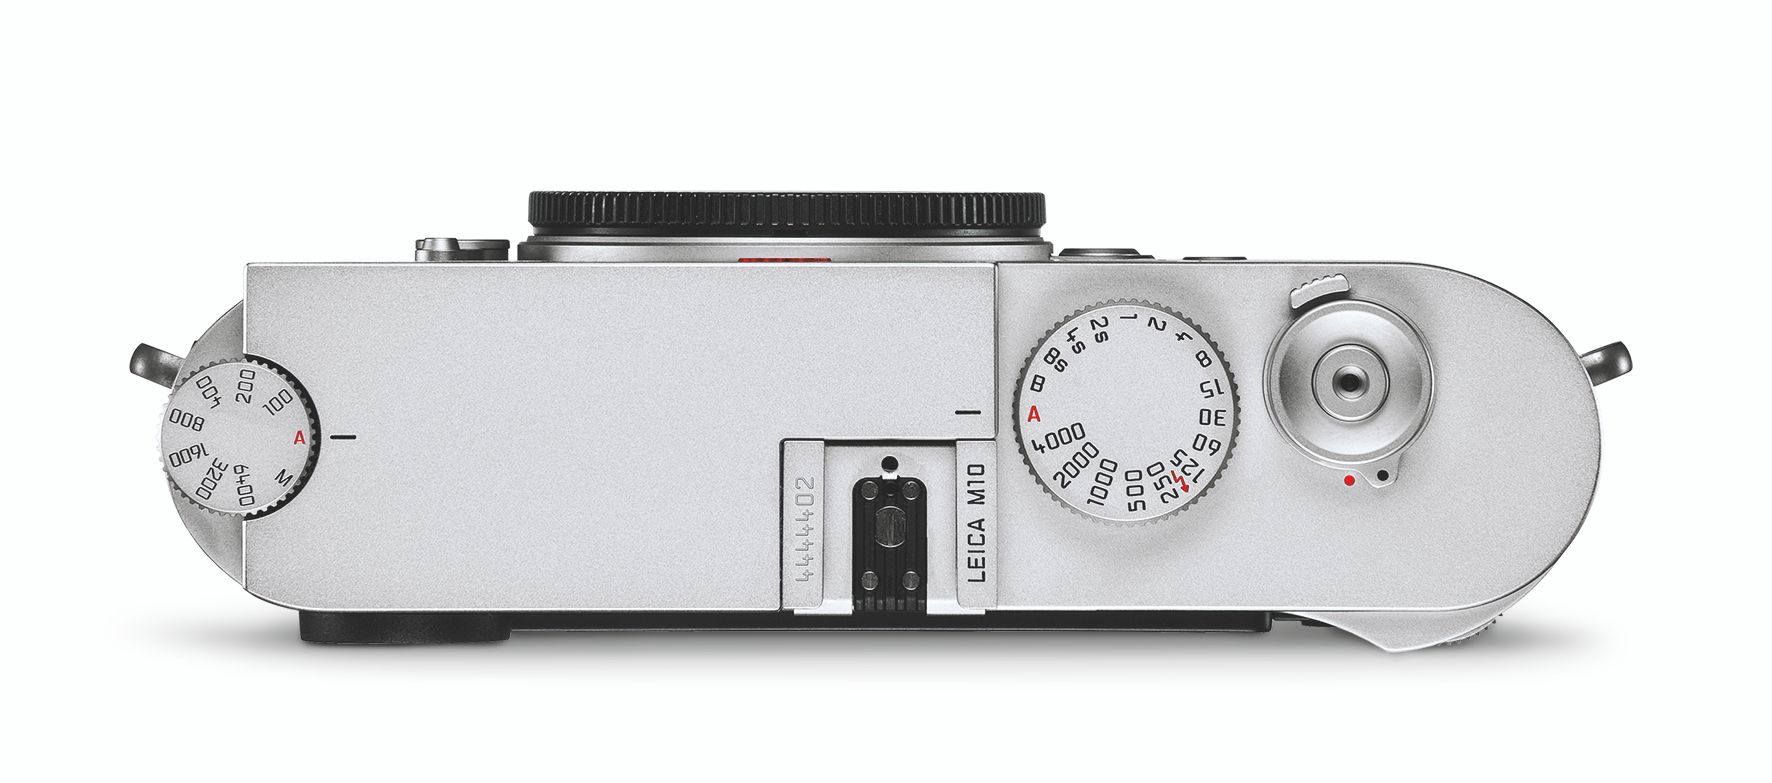 leica s new m10 rangefinder brings the m series into the digital age image 5